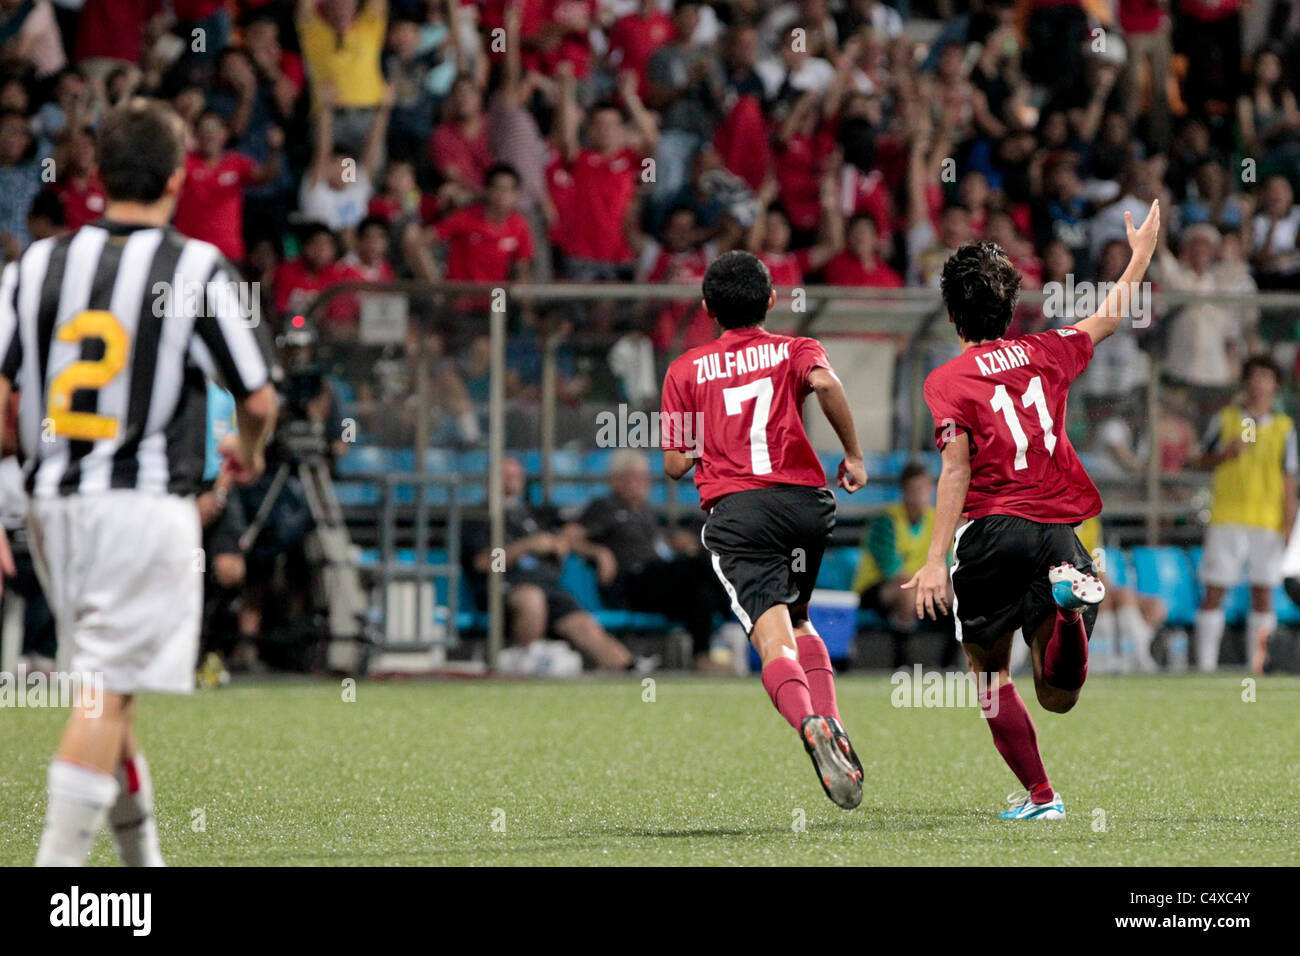 Azhar Ramli(right) and Zulfadhmi Suzliman of Singapore U15 react to Singapore's second goal during the 23rd Canon Lion City Cup Stock Photo